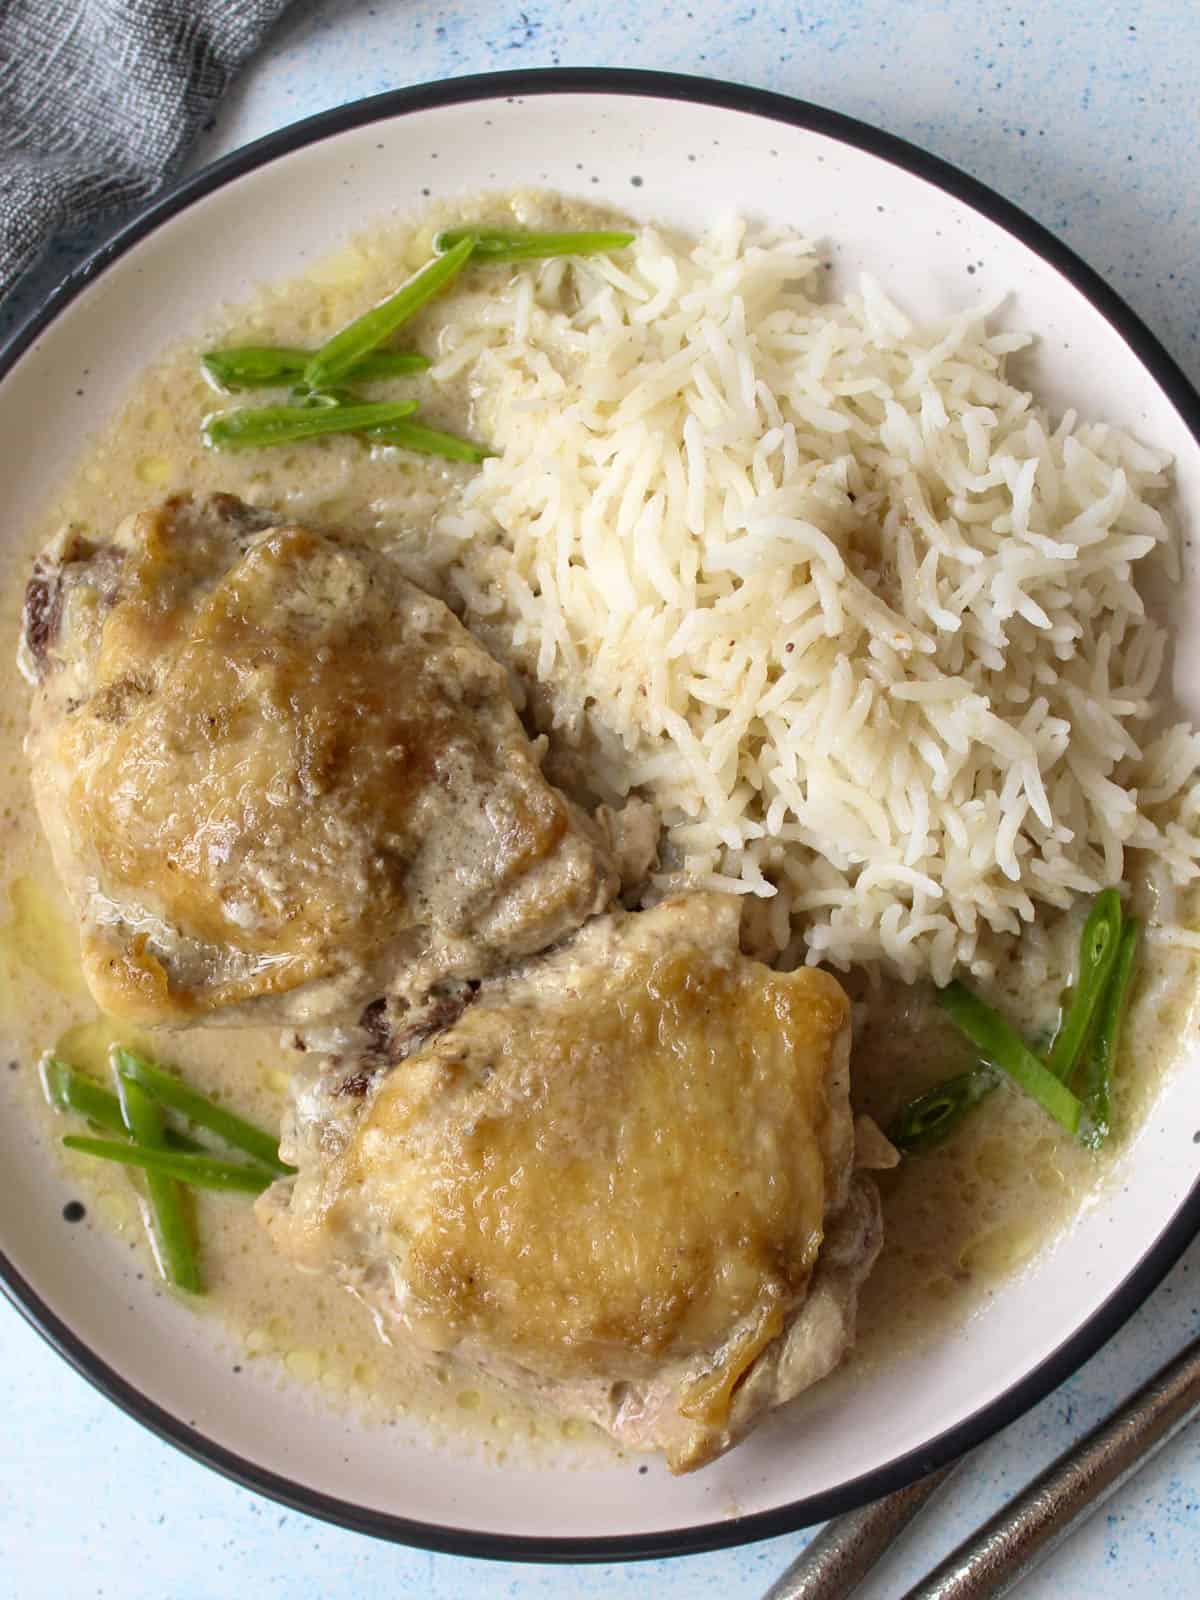 two cooked chicken thighs in green curry sauce served with basmati rice